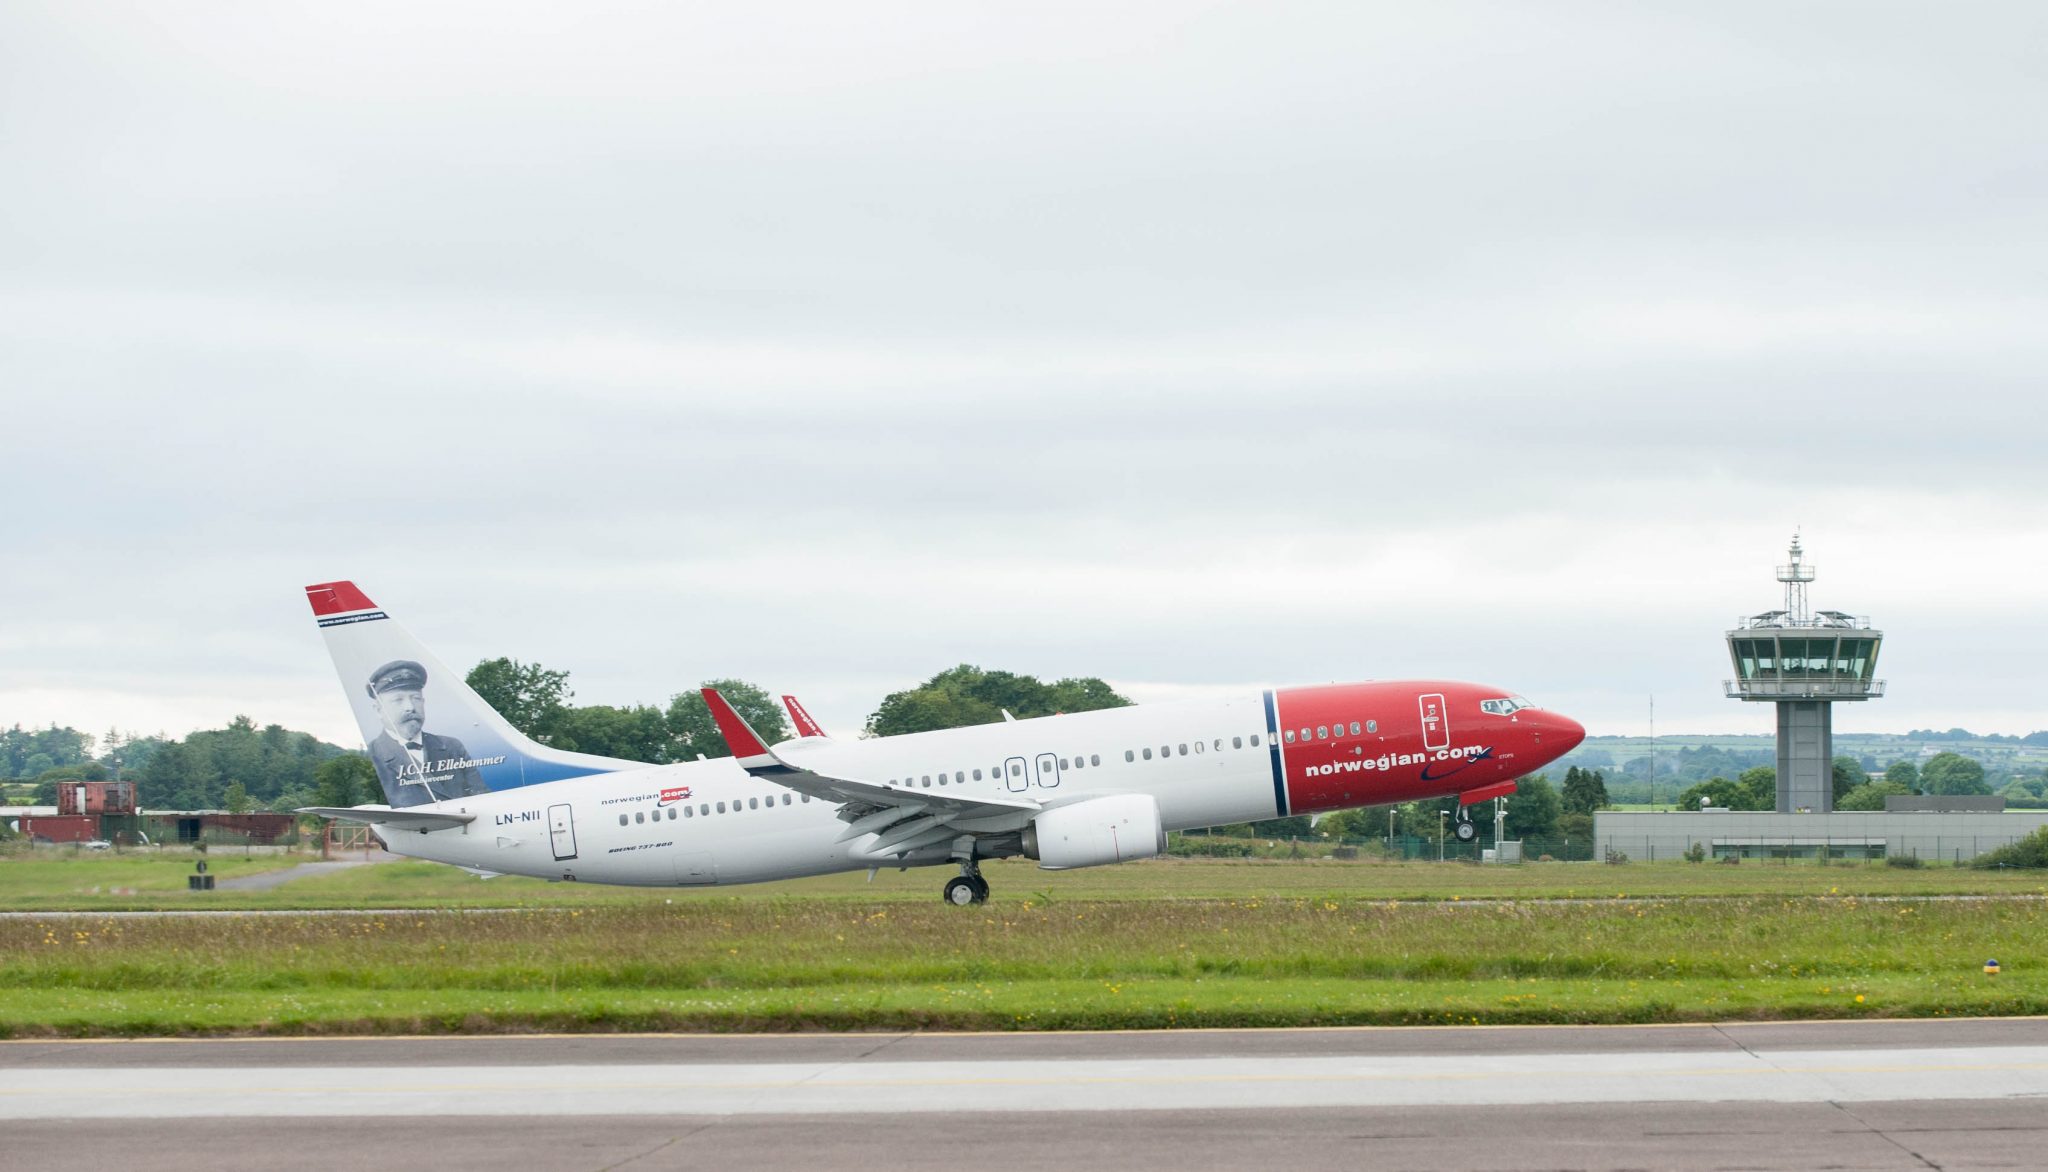 Norwegian to fly direct from Cork to Boston, New York and Barcelona